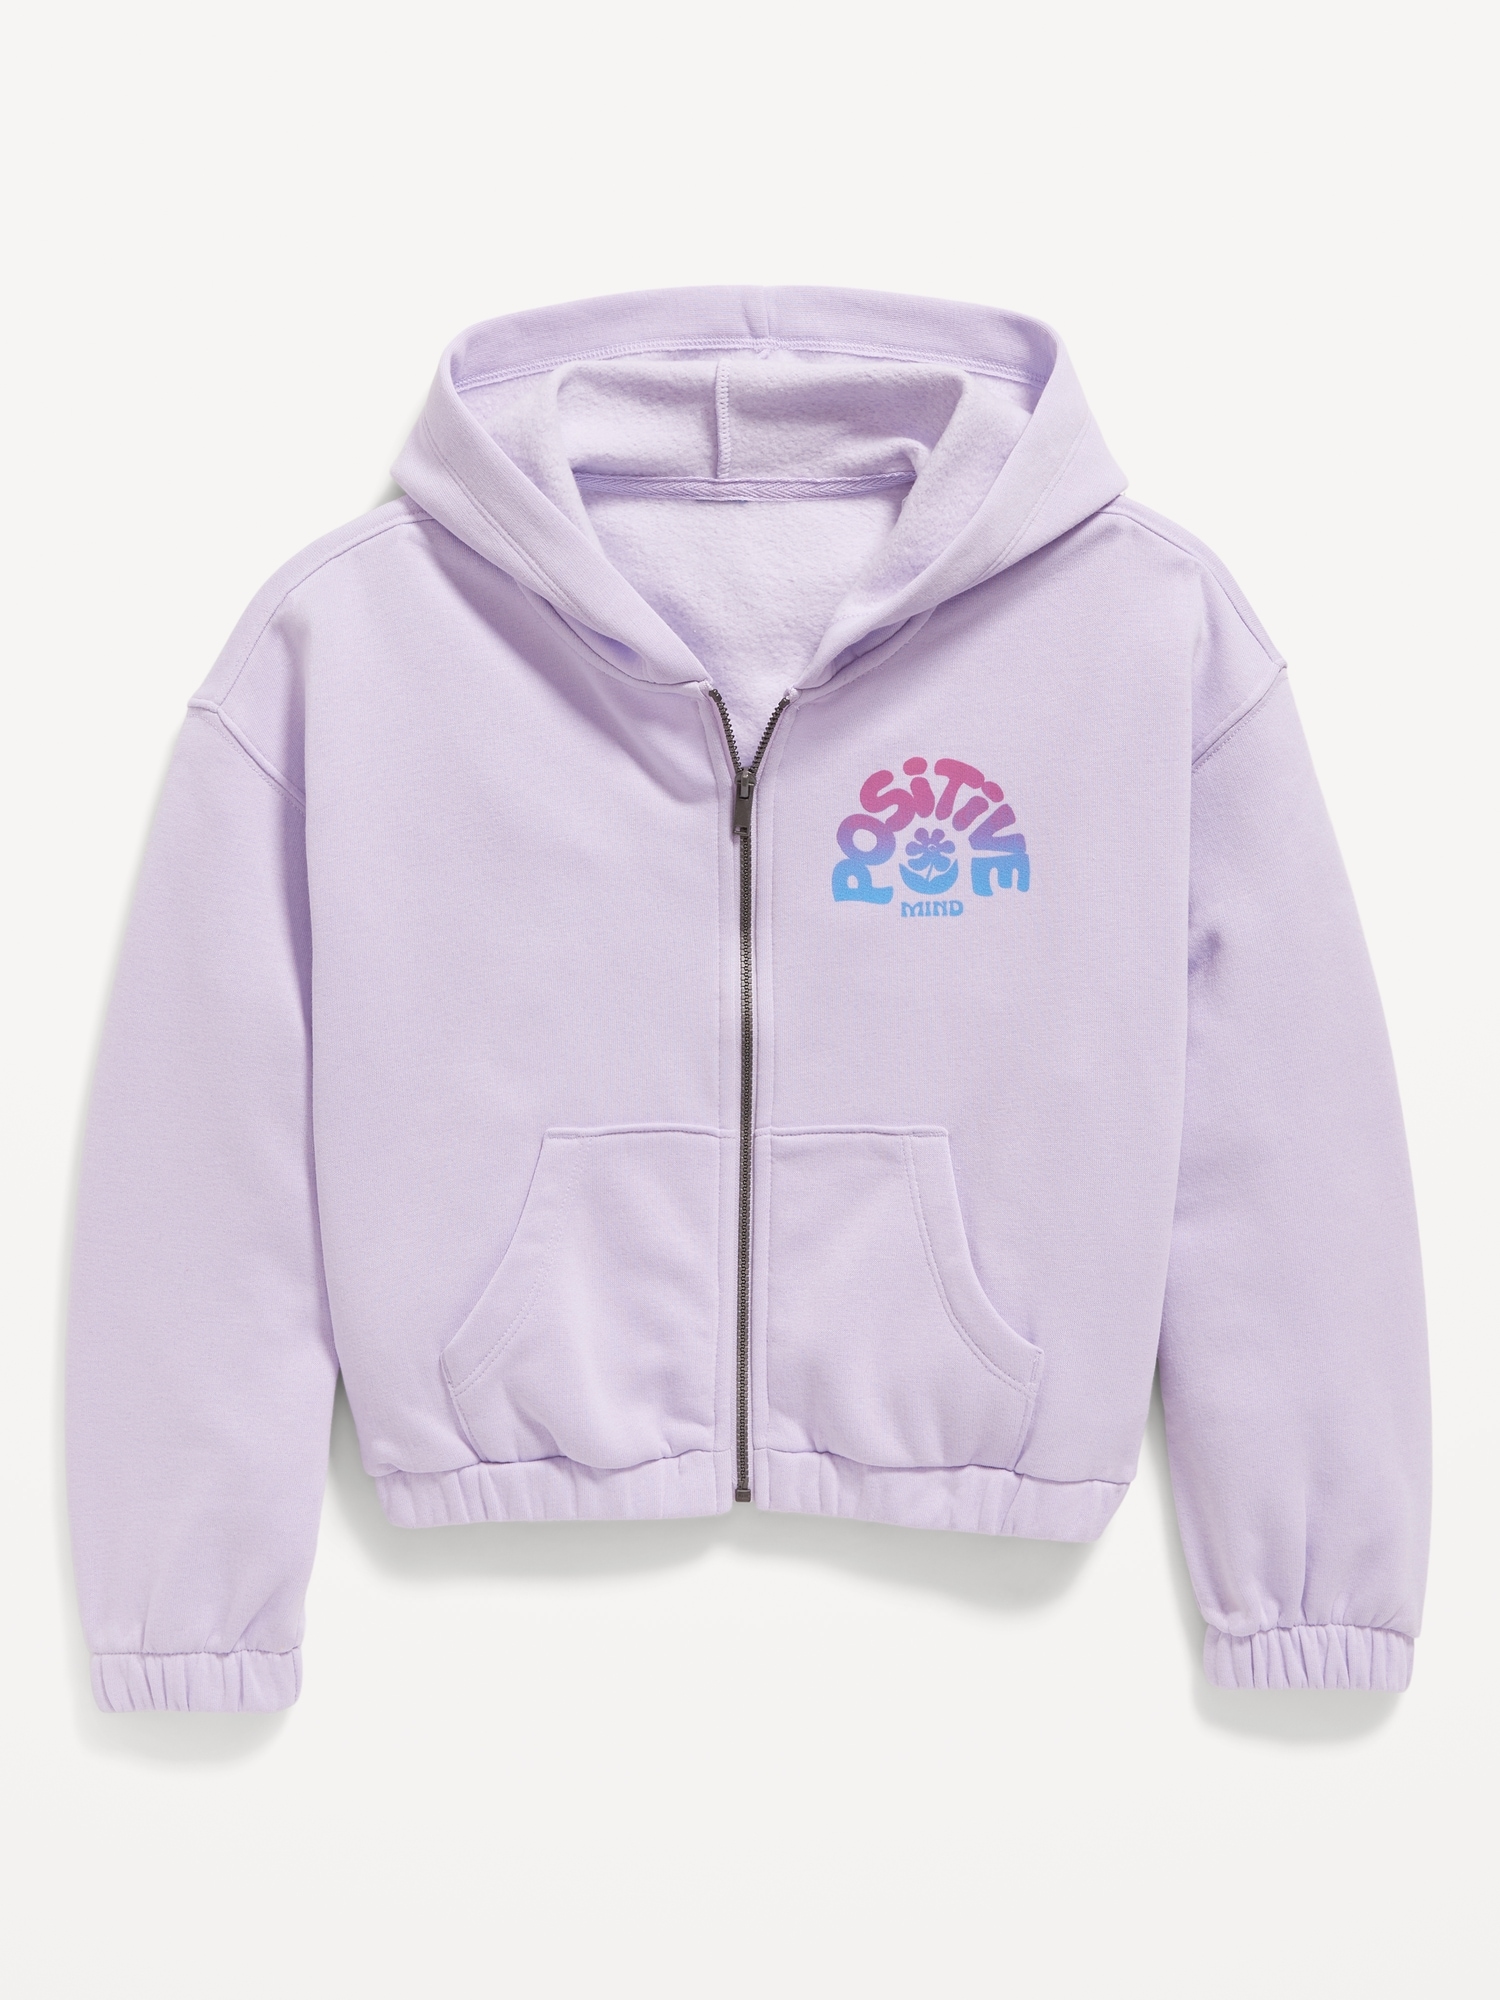 Cinched-Hem Graphic Zip Hoodie for Girls